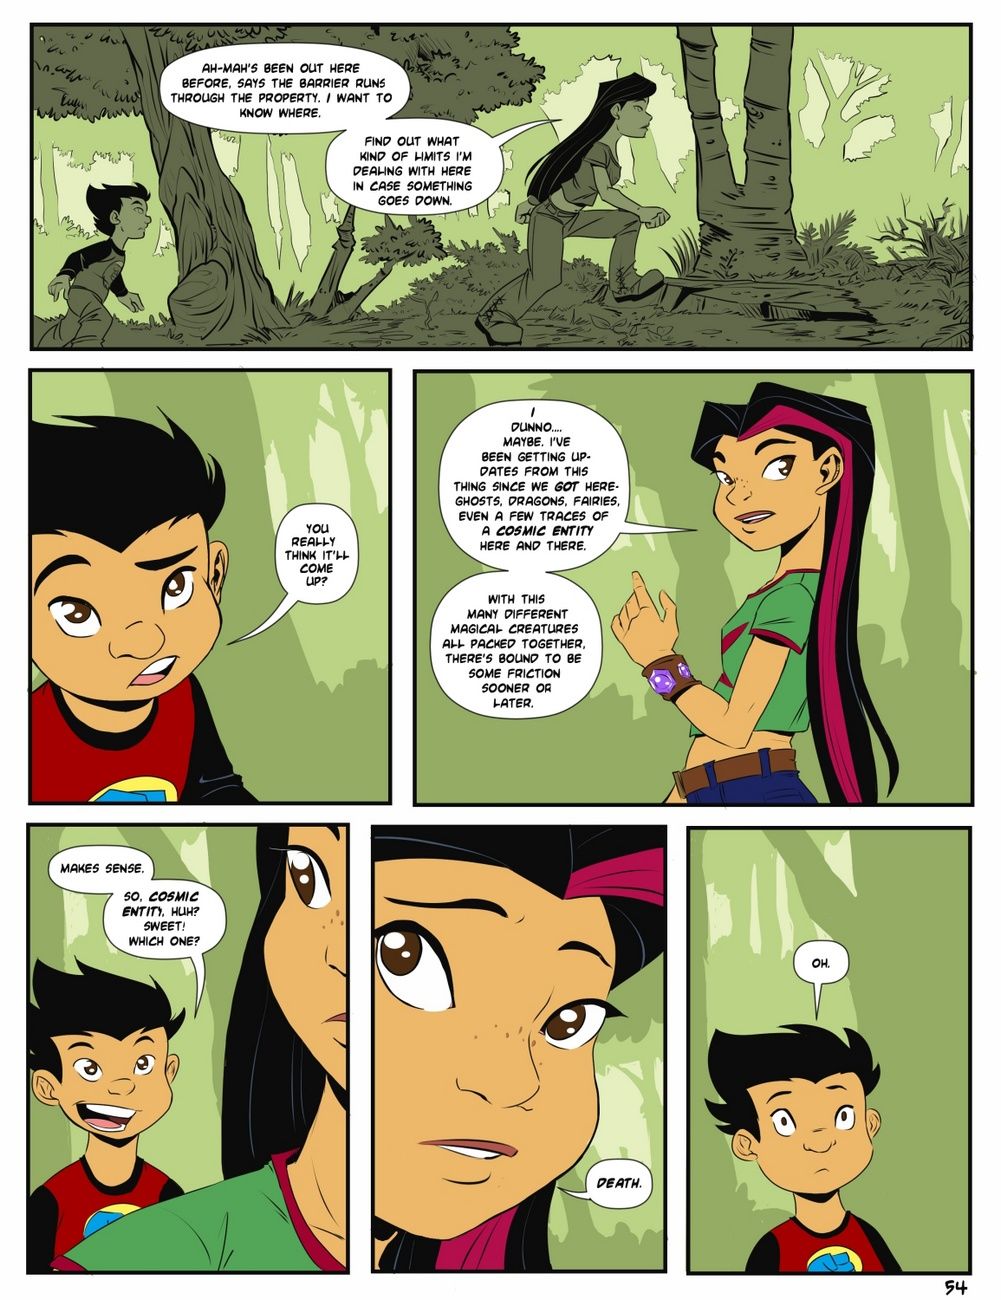 Camp Sherwood [Mr.D] (Ongoing) page 55